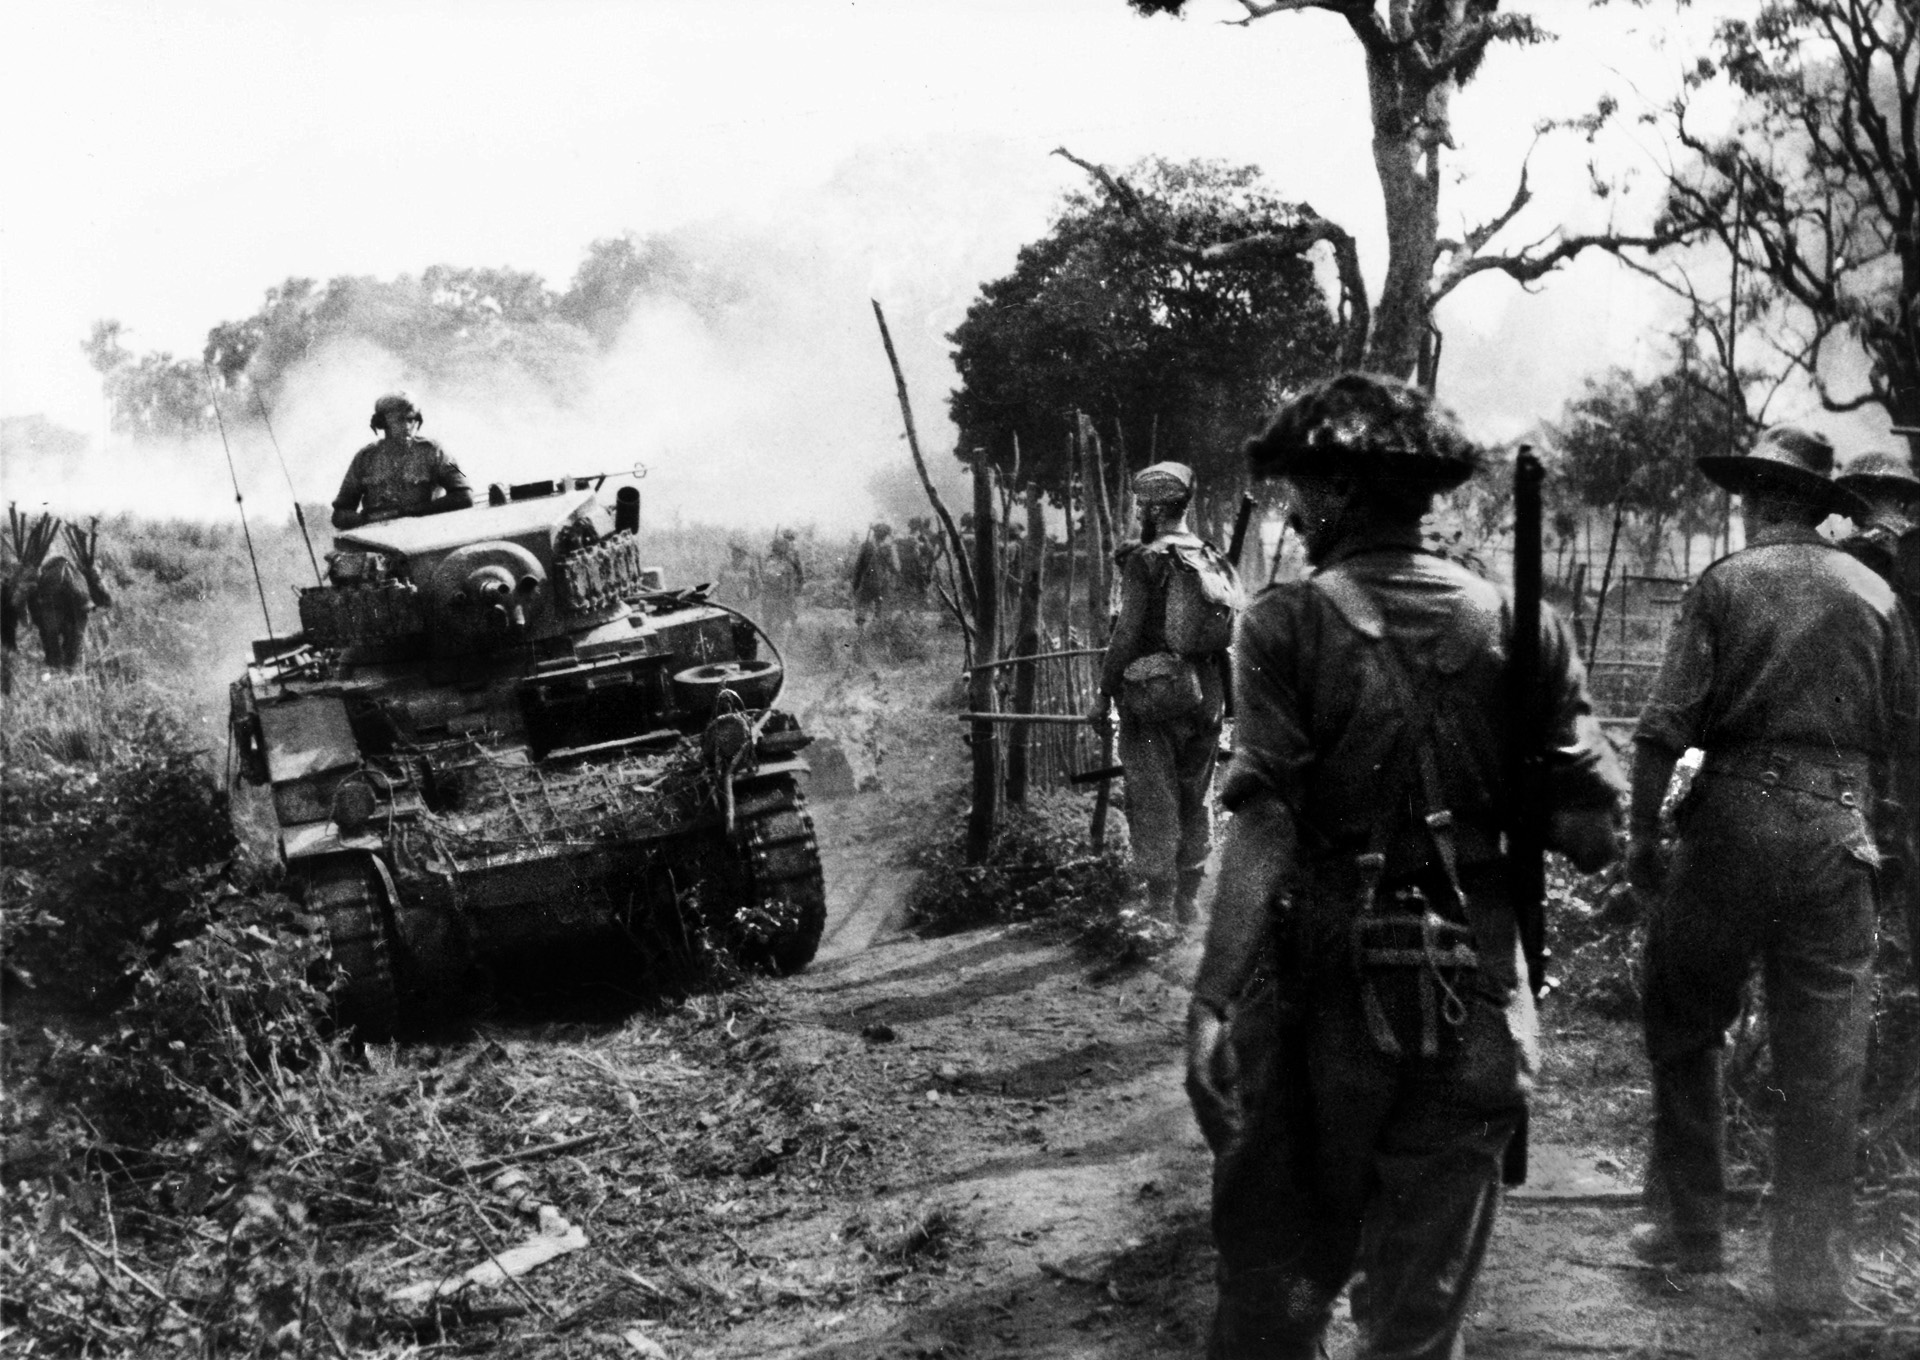 Traversing the rugged terrain of the interior of Burma, tanks of the 19th Indian “Dagger” Division roll down a dirt path while infantrymen pause to glance at the armored vehicles. General William Slim, commander of the British 14th Army, led his forces from the brink of total defeat to victory over the Japanese in the China-Burma-India Theater.